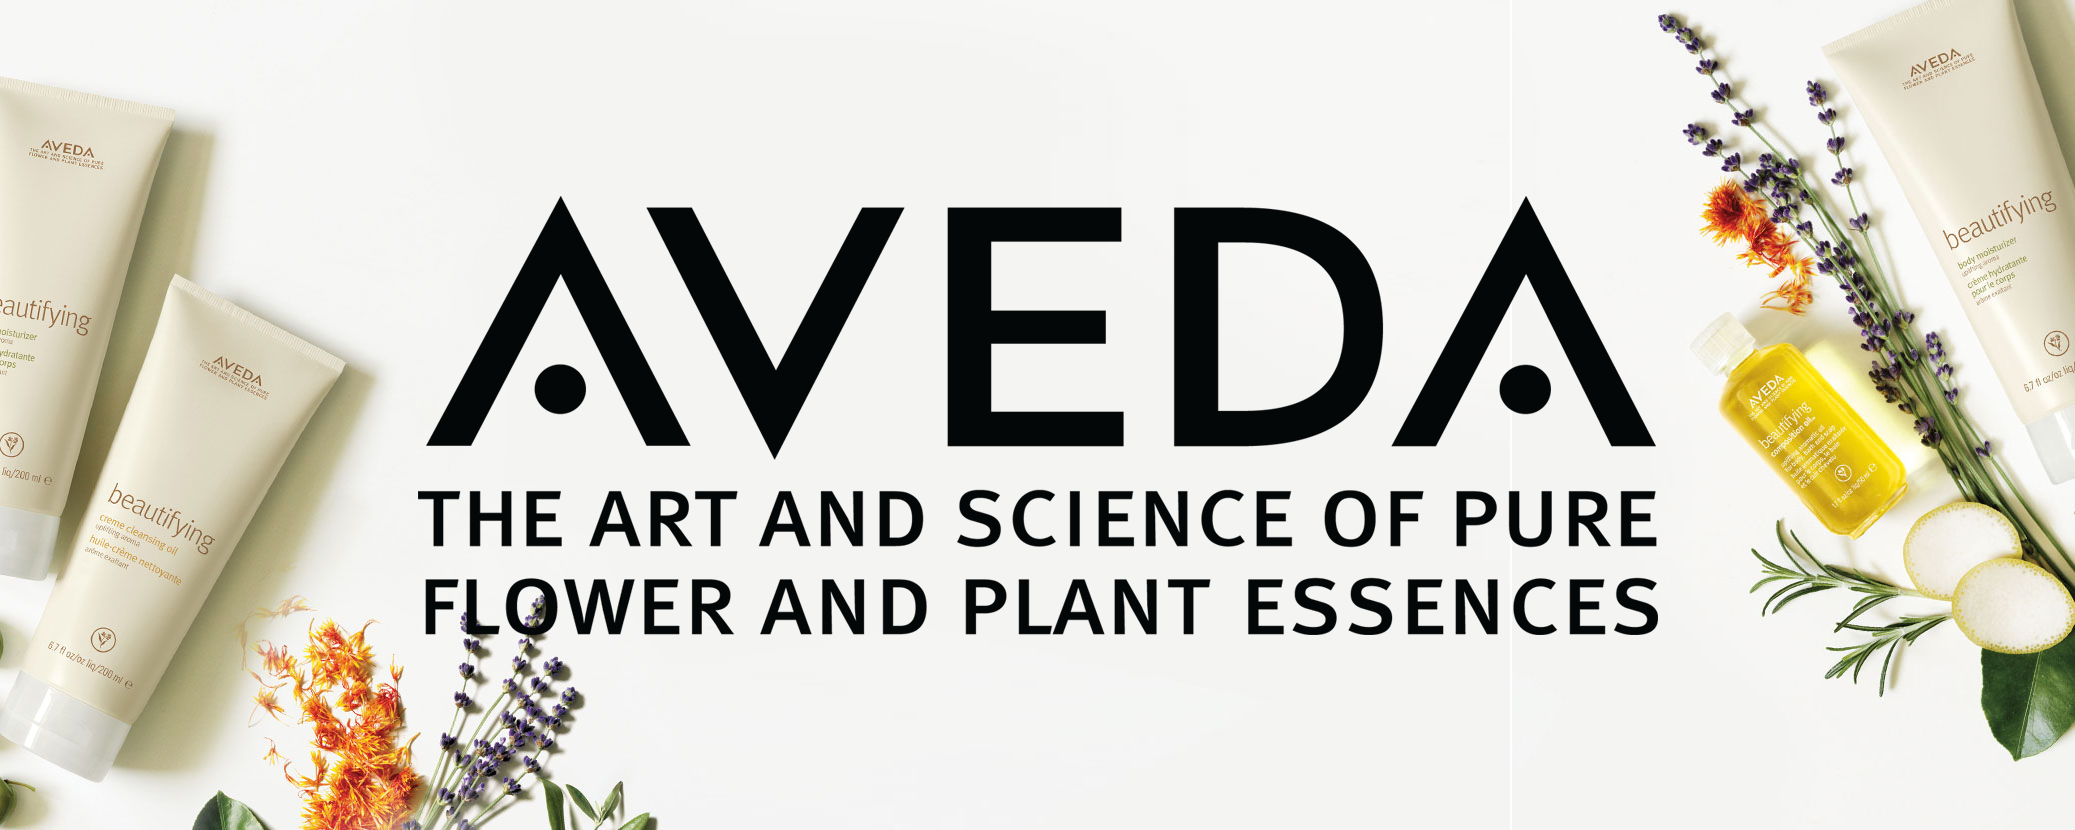 Aveda Products With Floral Background Progressions Spa Salon